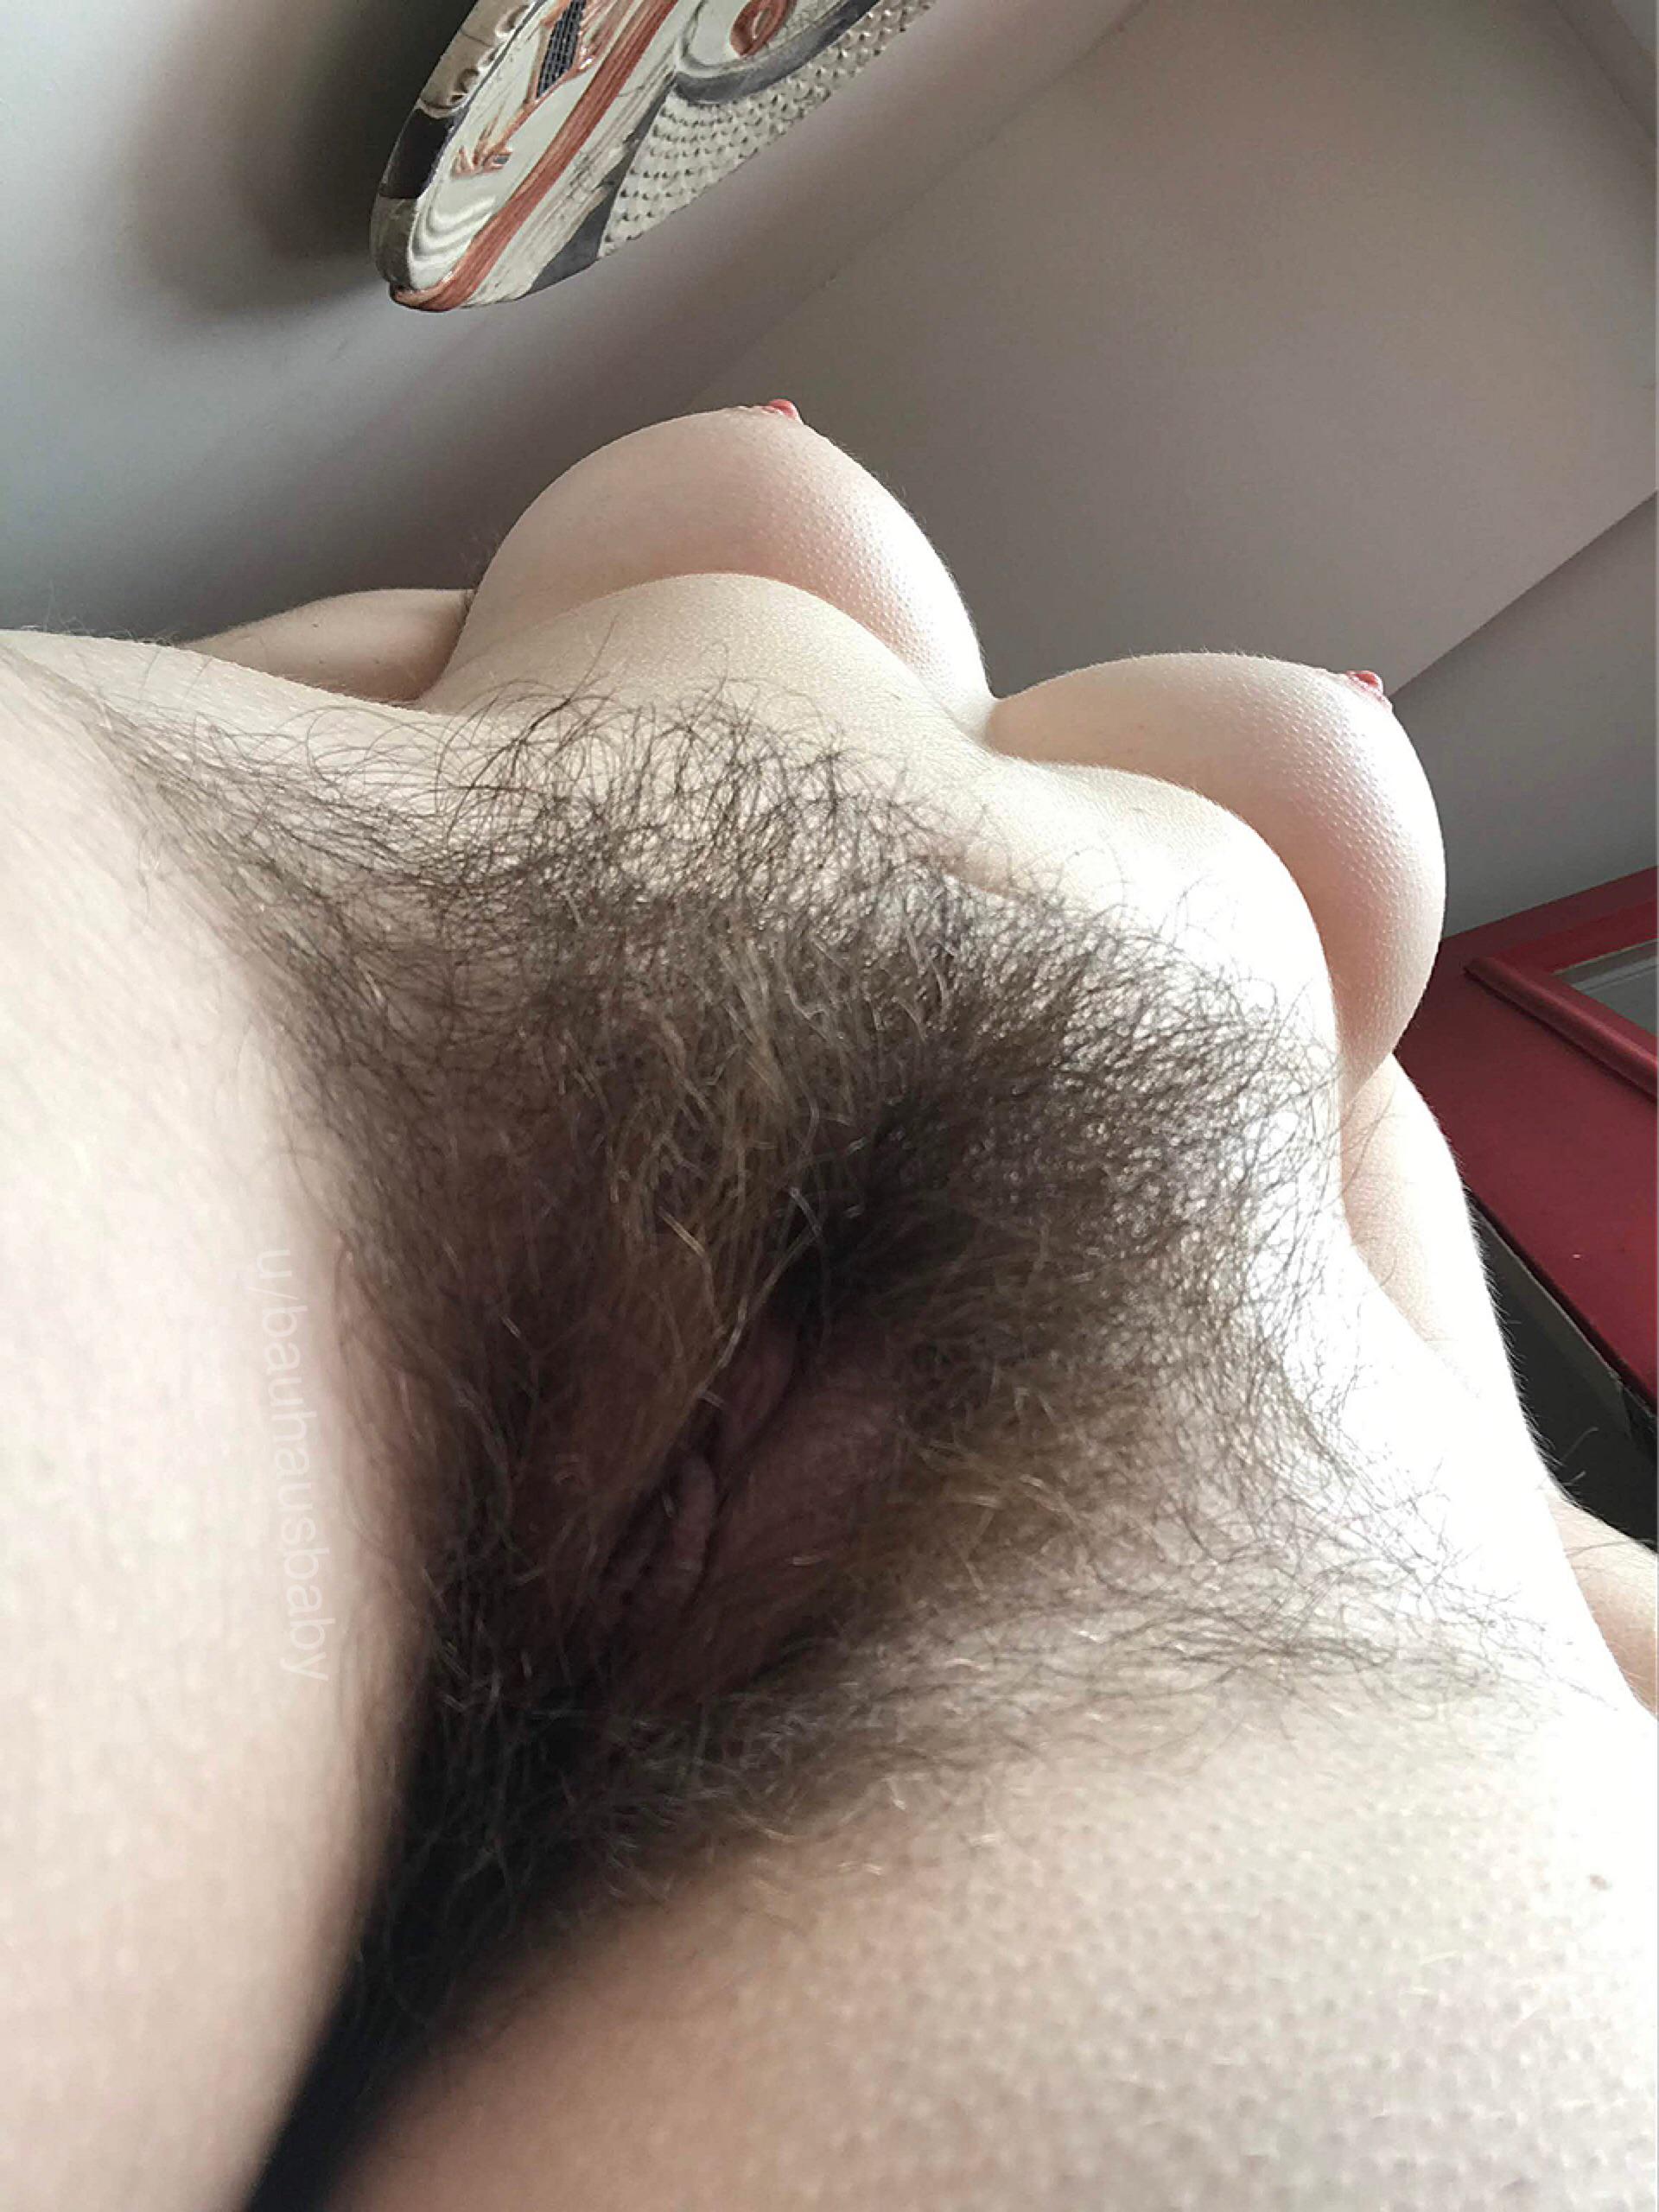 POV standing over you with my hairy little pussy